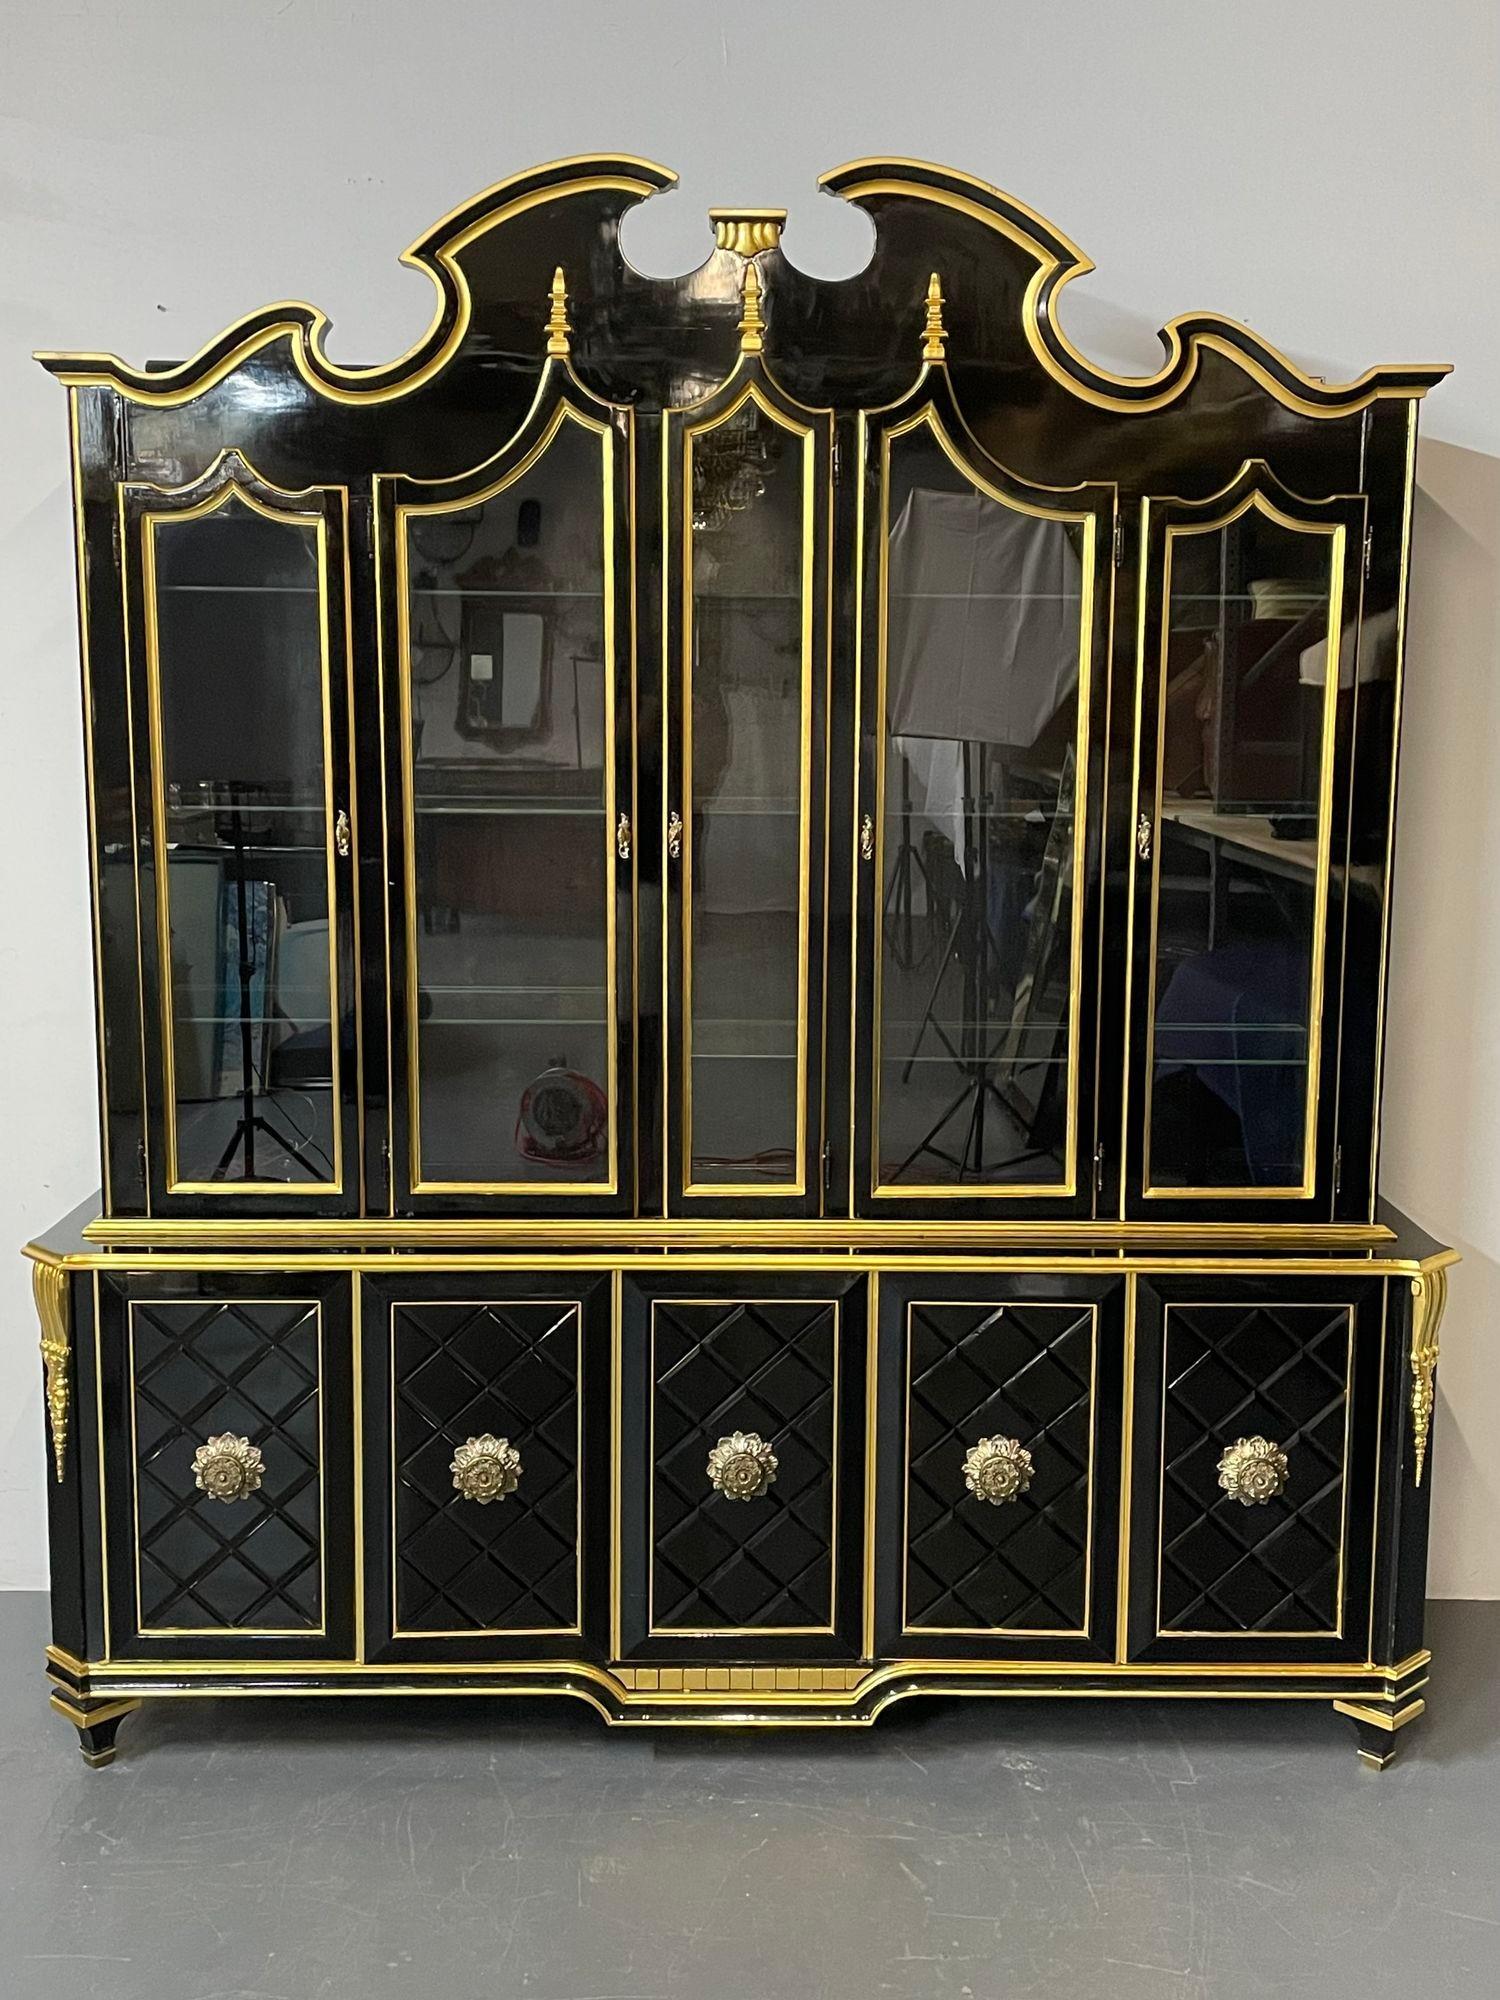 Large Hollywood Regency Style Bookcase / China Cabinet, Maison Jansen Inspired copied by Grosfeld House.
A Grand Hollywood Regency style ebonized and gold parcel-gilt breakfront or bookcase, Dish cabinet having a molded top over a conforming cabinet